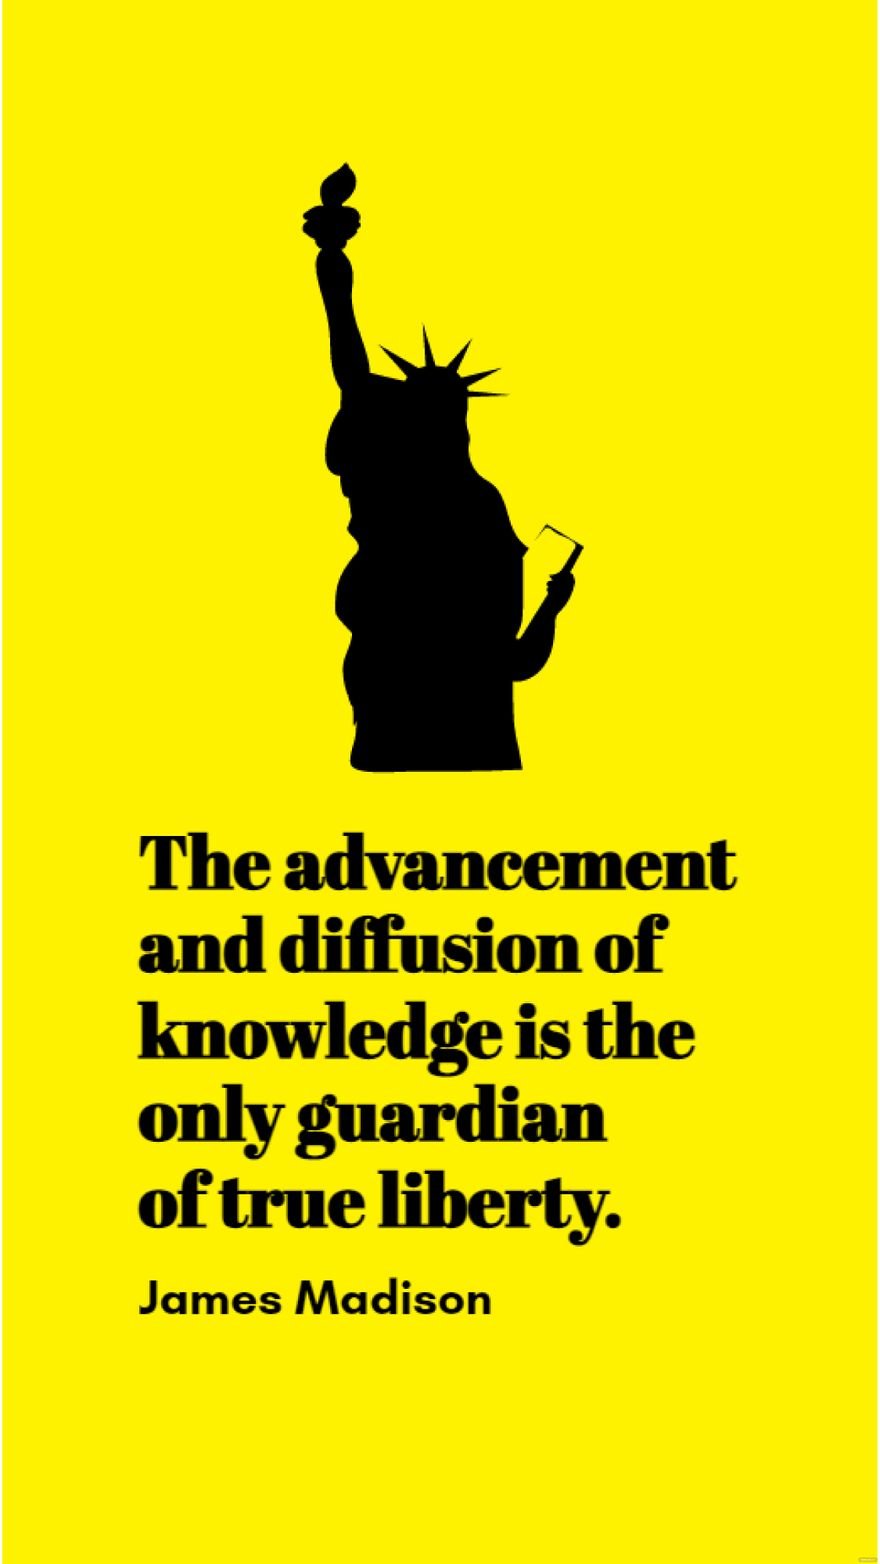 Free James Madison - The advancement and diffusion of knowledge is the only guardian of true liberty. in JPG